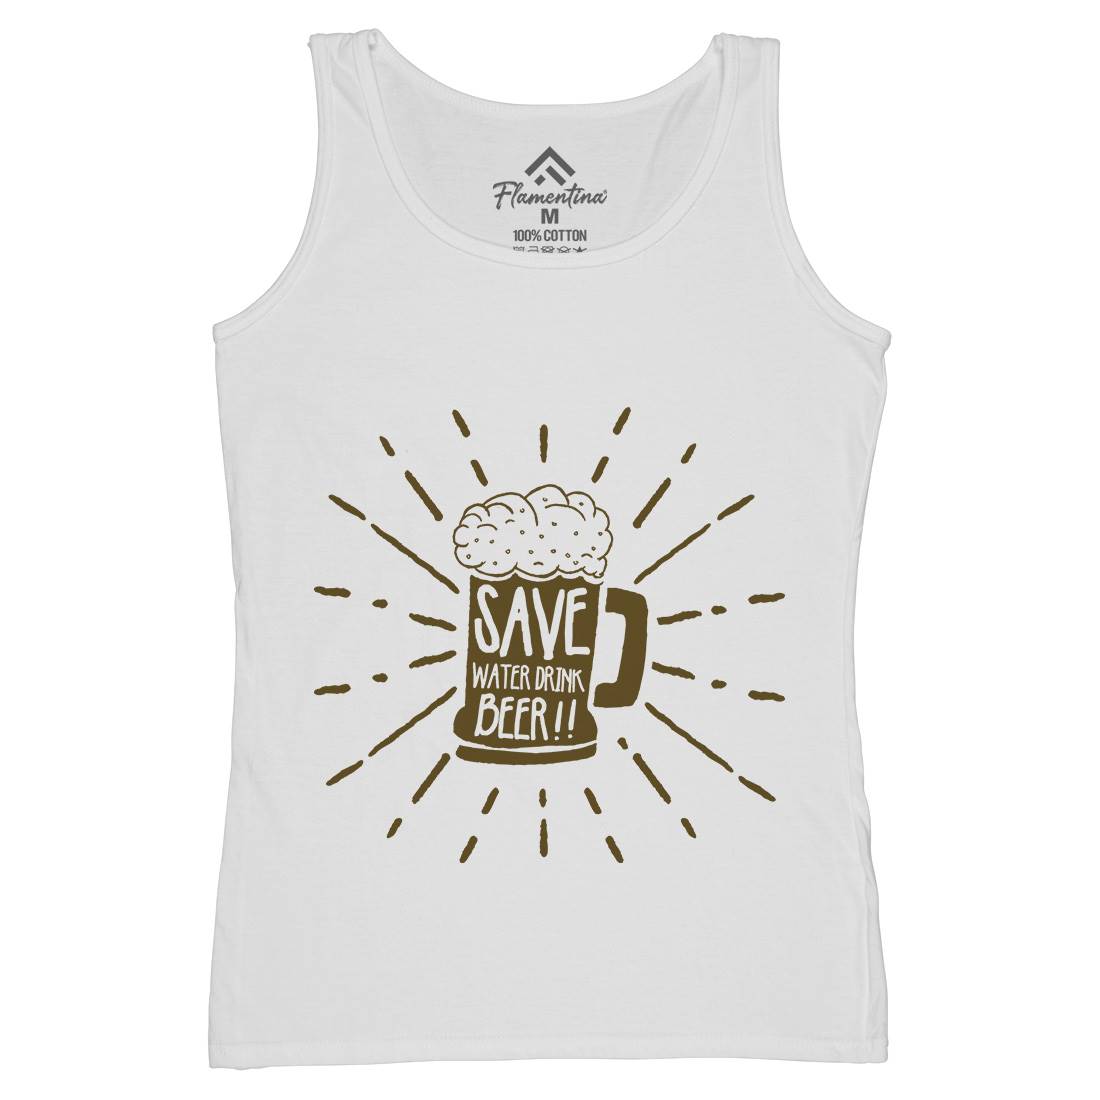 Save Water Womens Organic Tank Top Vest Drinks A368